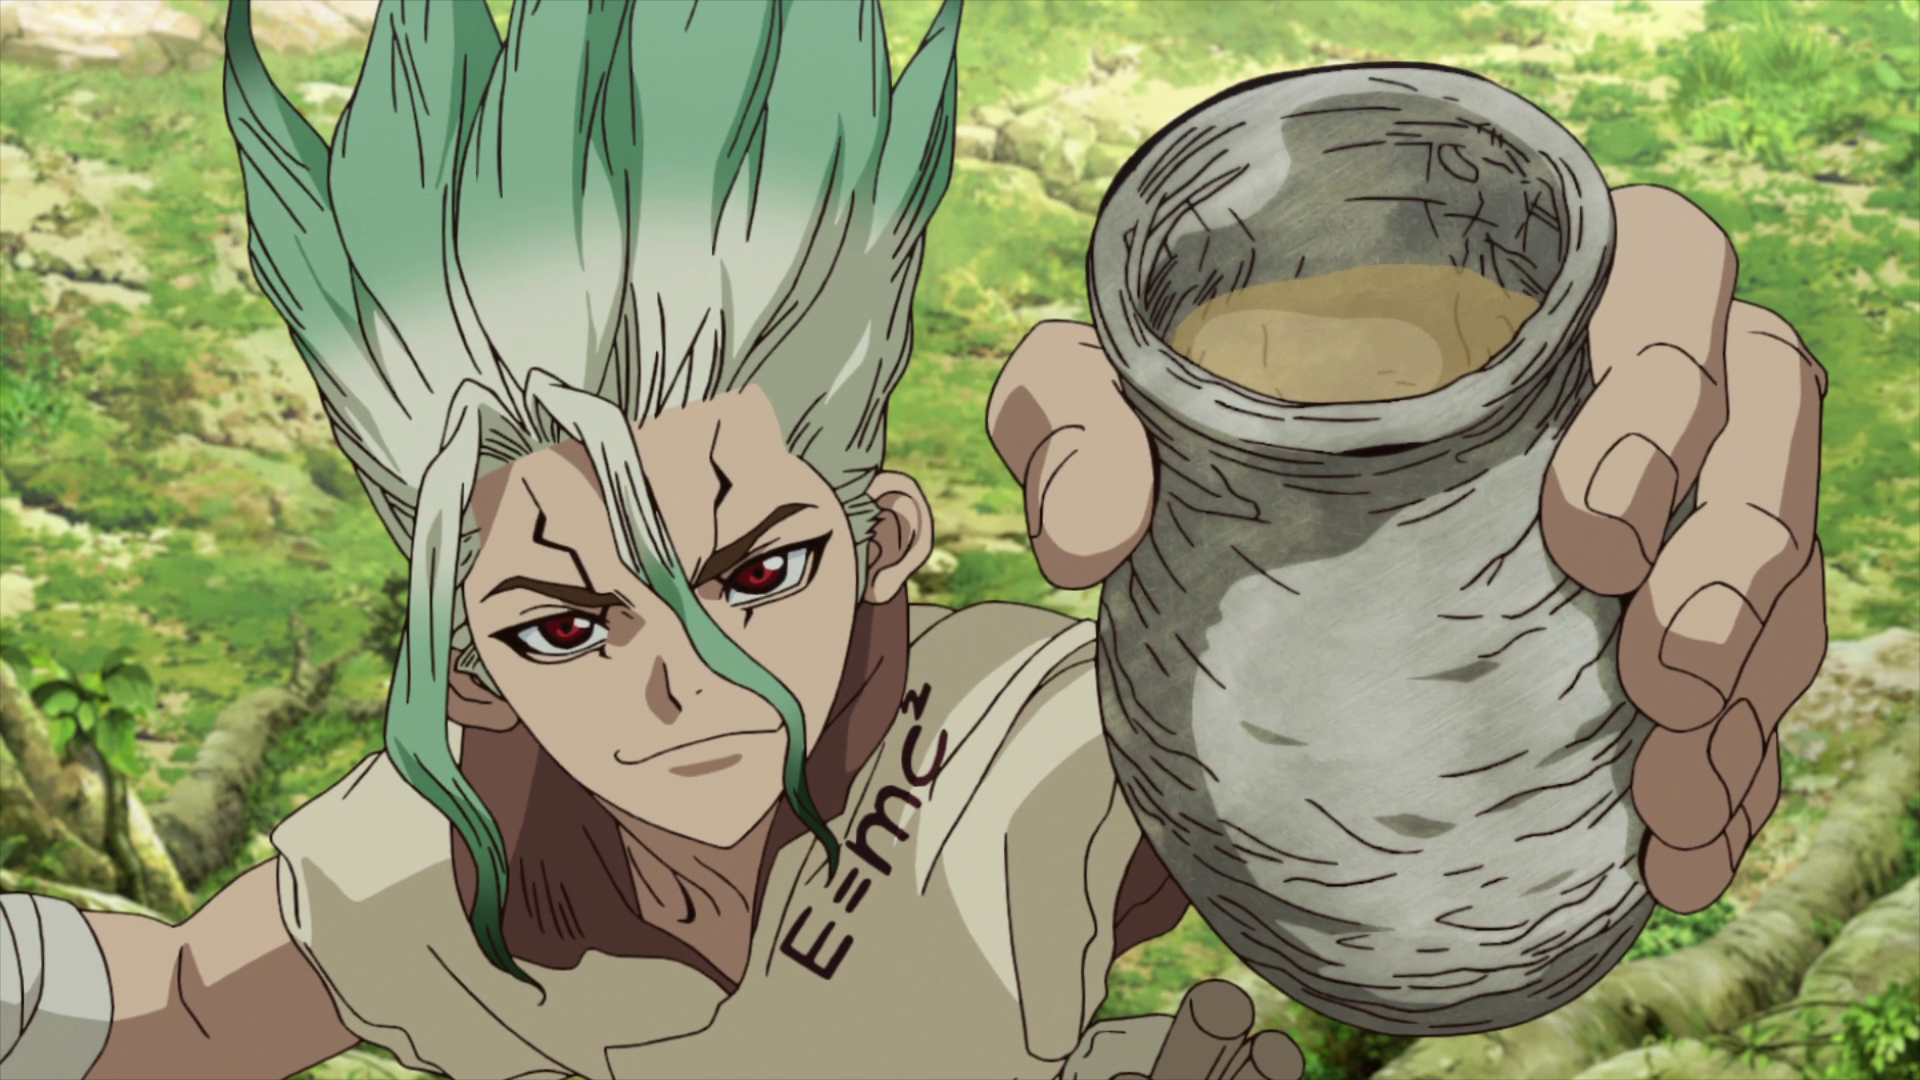 Dr. Stone: New World Episode 4 Review - I drink and watch anime